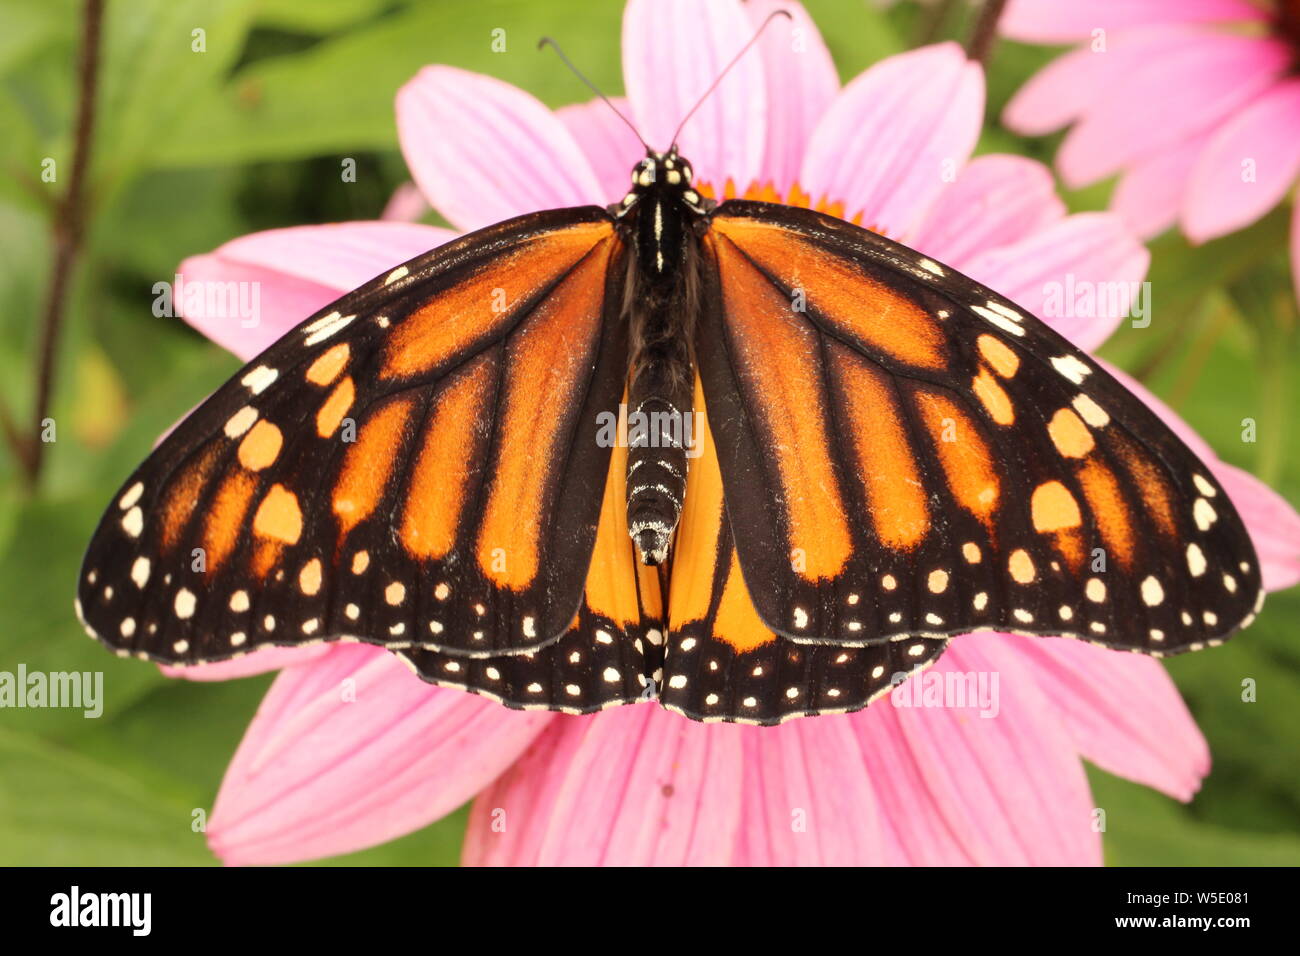 Female monarch butterfly perched on an purple coneflower. Stock Photo